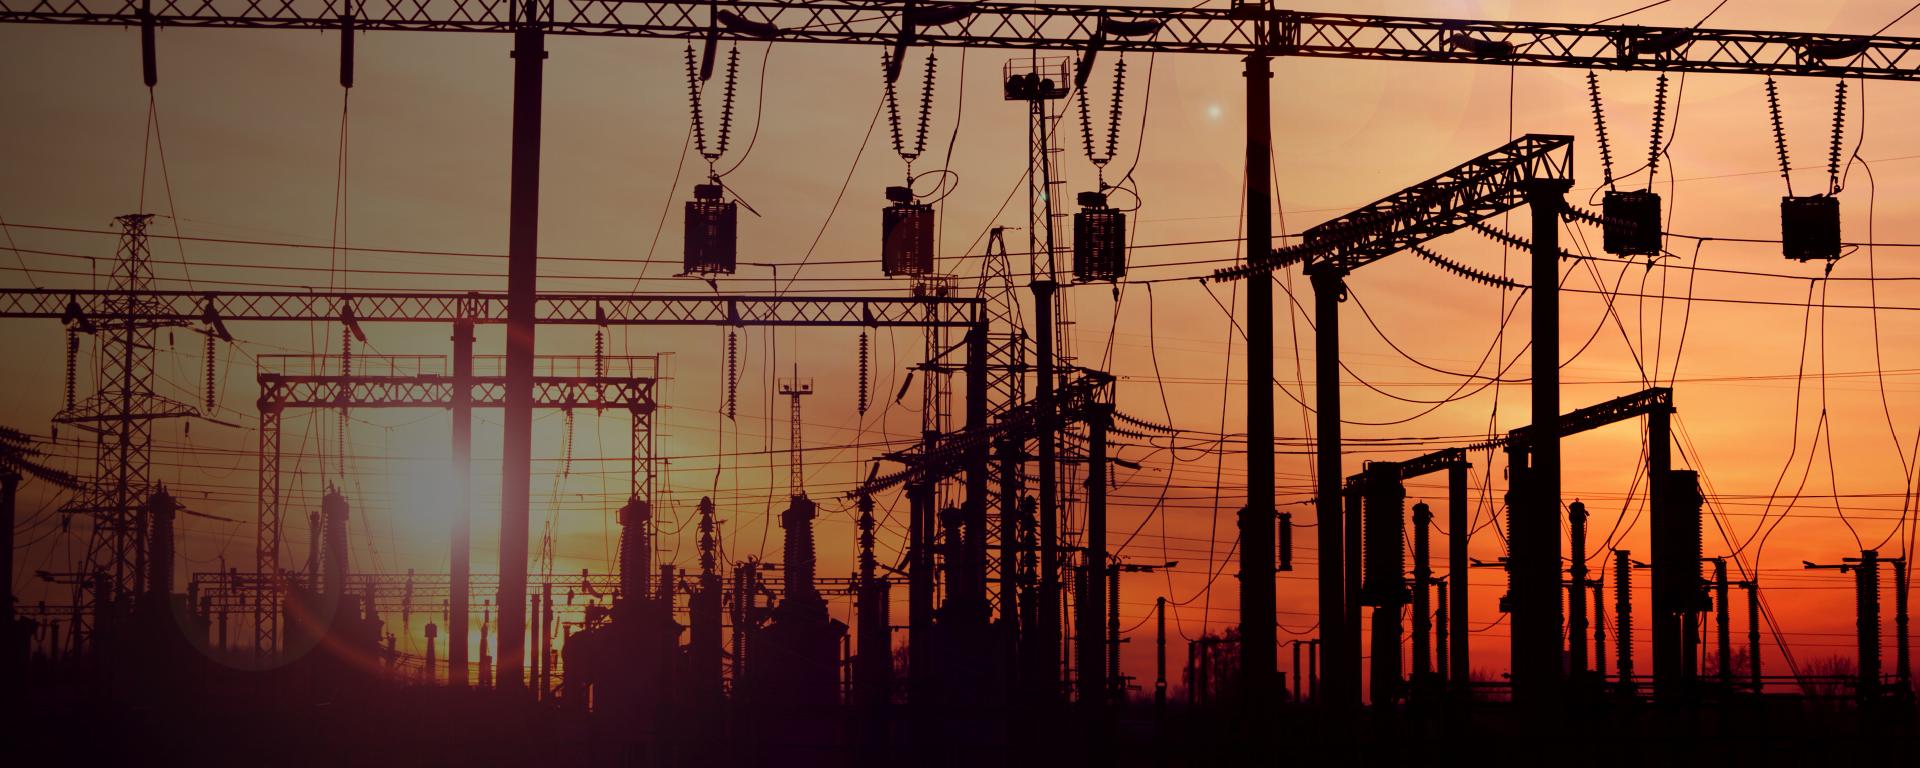 Electrical substation equipment in sunset